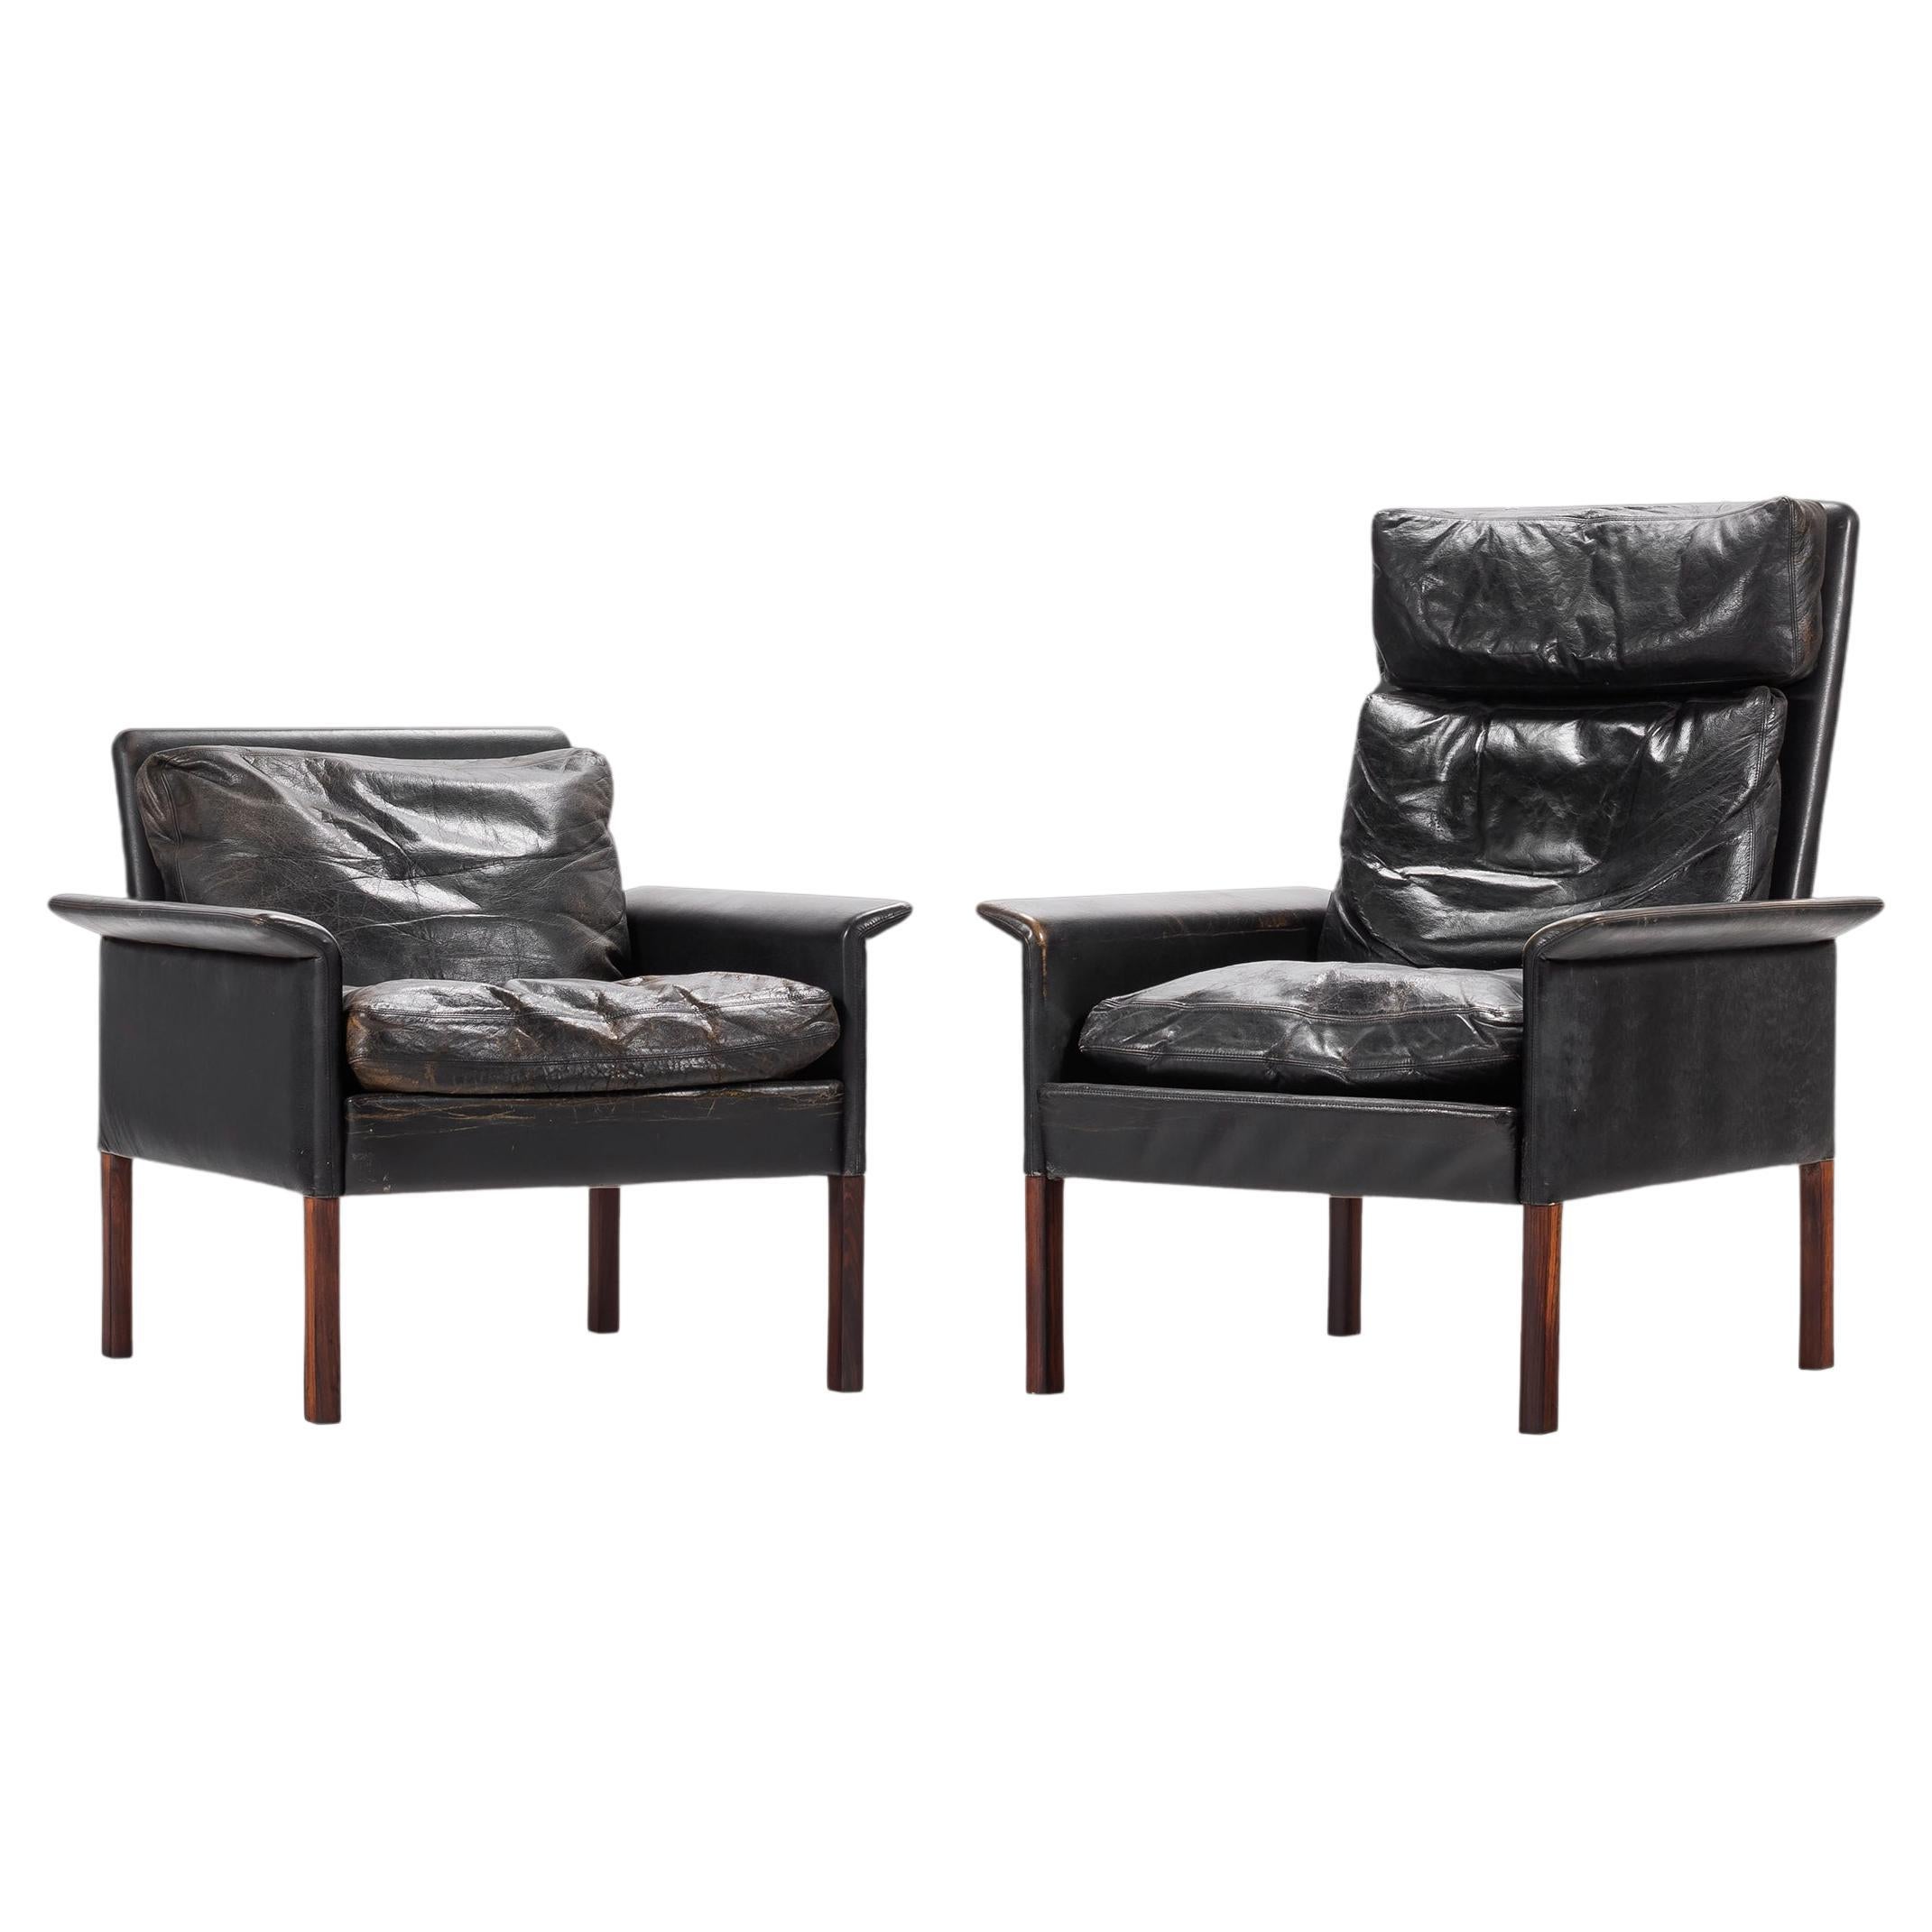 Set of Two '2' of Model 500 Rosewood Lounge Chairs by Hans Olsen for CS Møbler